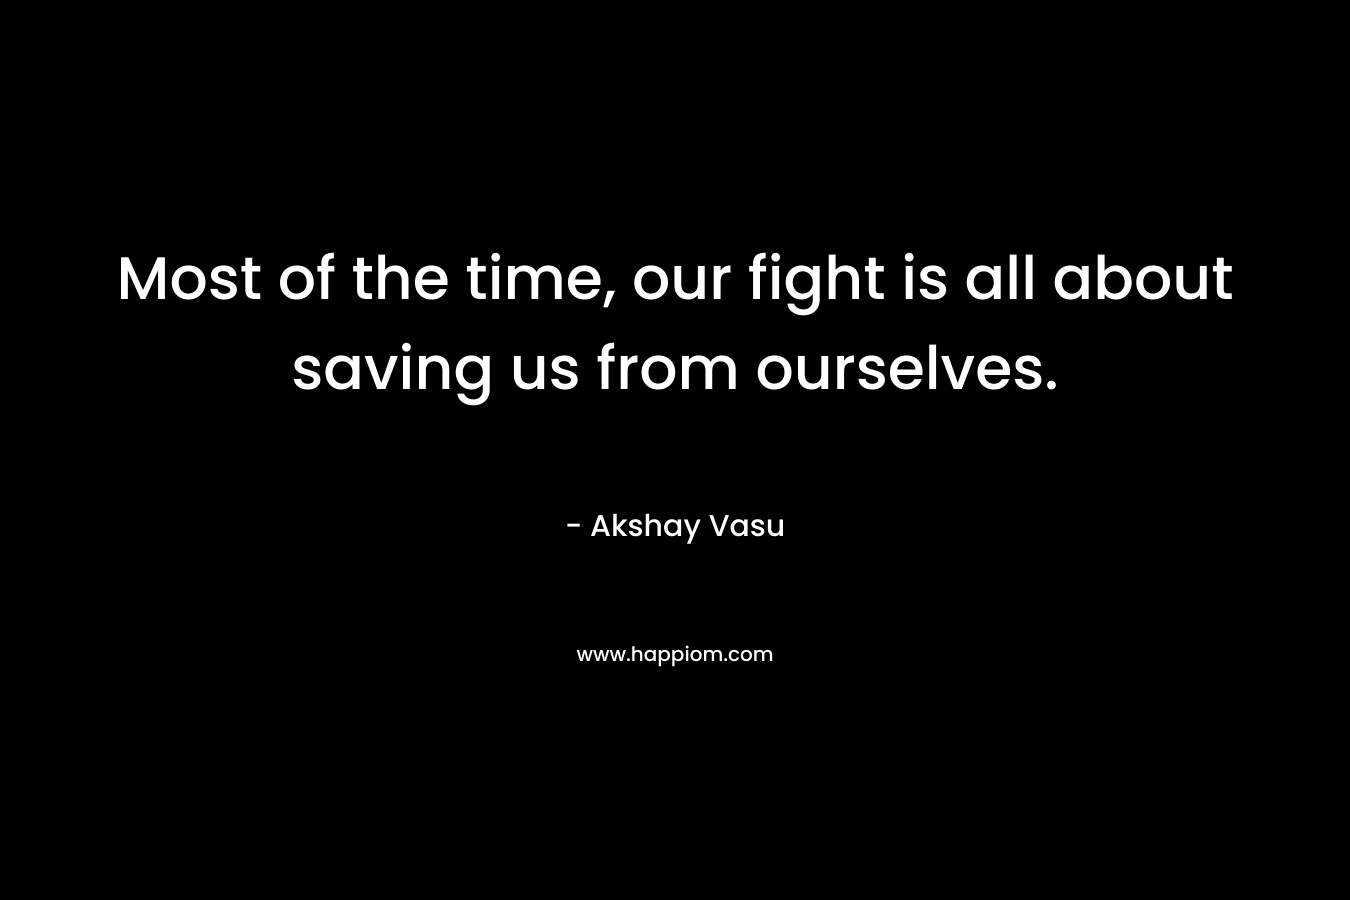 Most of the time, our fight is all about saving us from ourselves. – Akshay Vasu